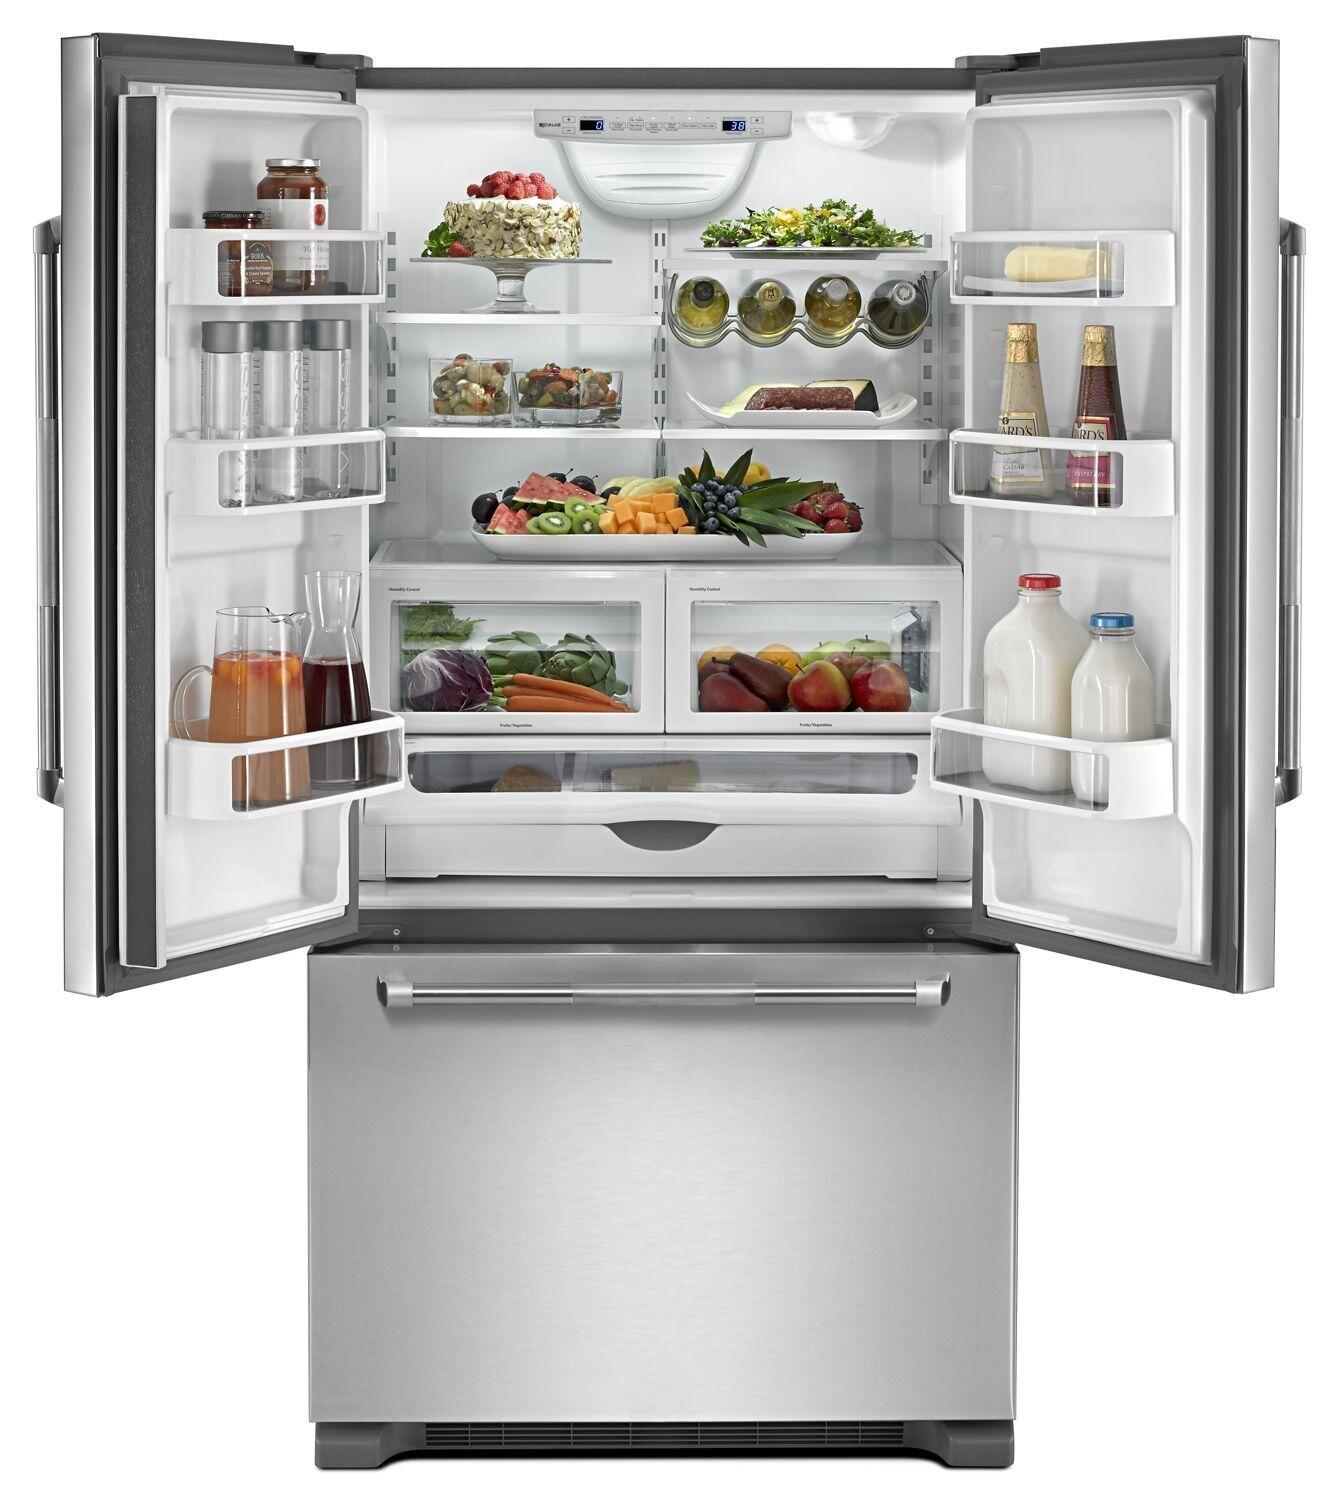 Jennair JFC2290REP 72" Counter Depth French Door Refrigerator - Pro Style Stainless